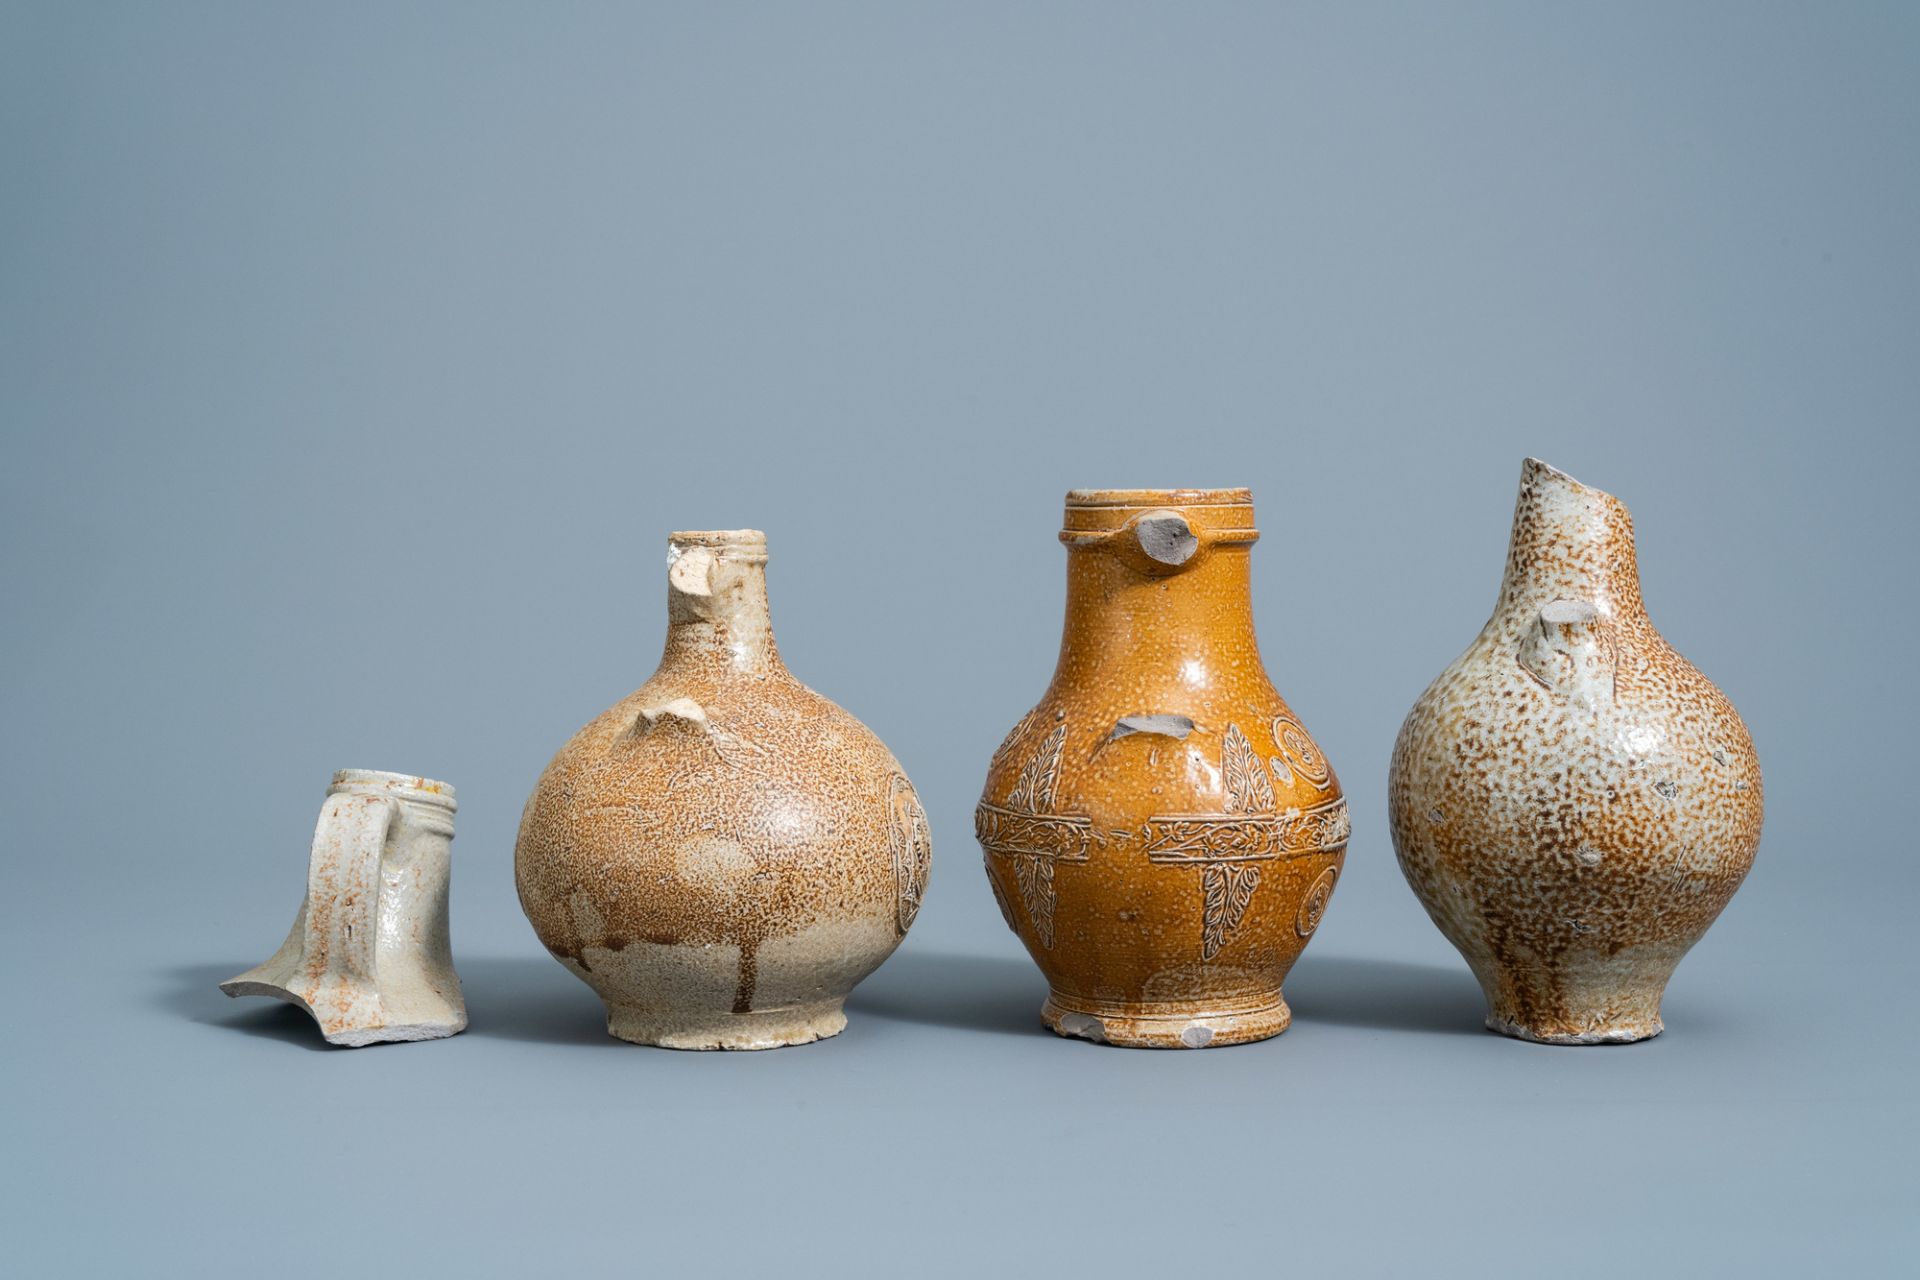 Three German stoneware bellarmine jugs and a neck fragment, 16th/17th C. - Image 5 of 8